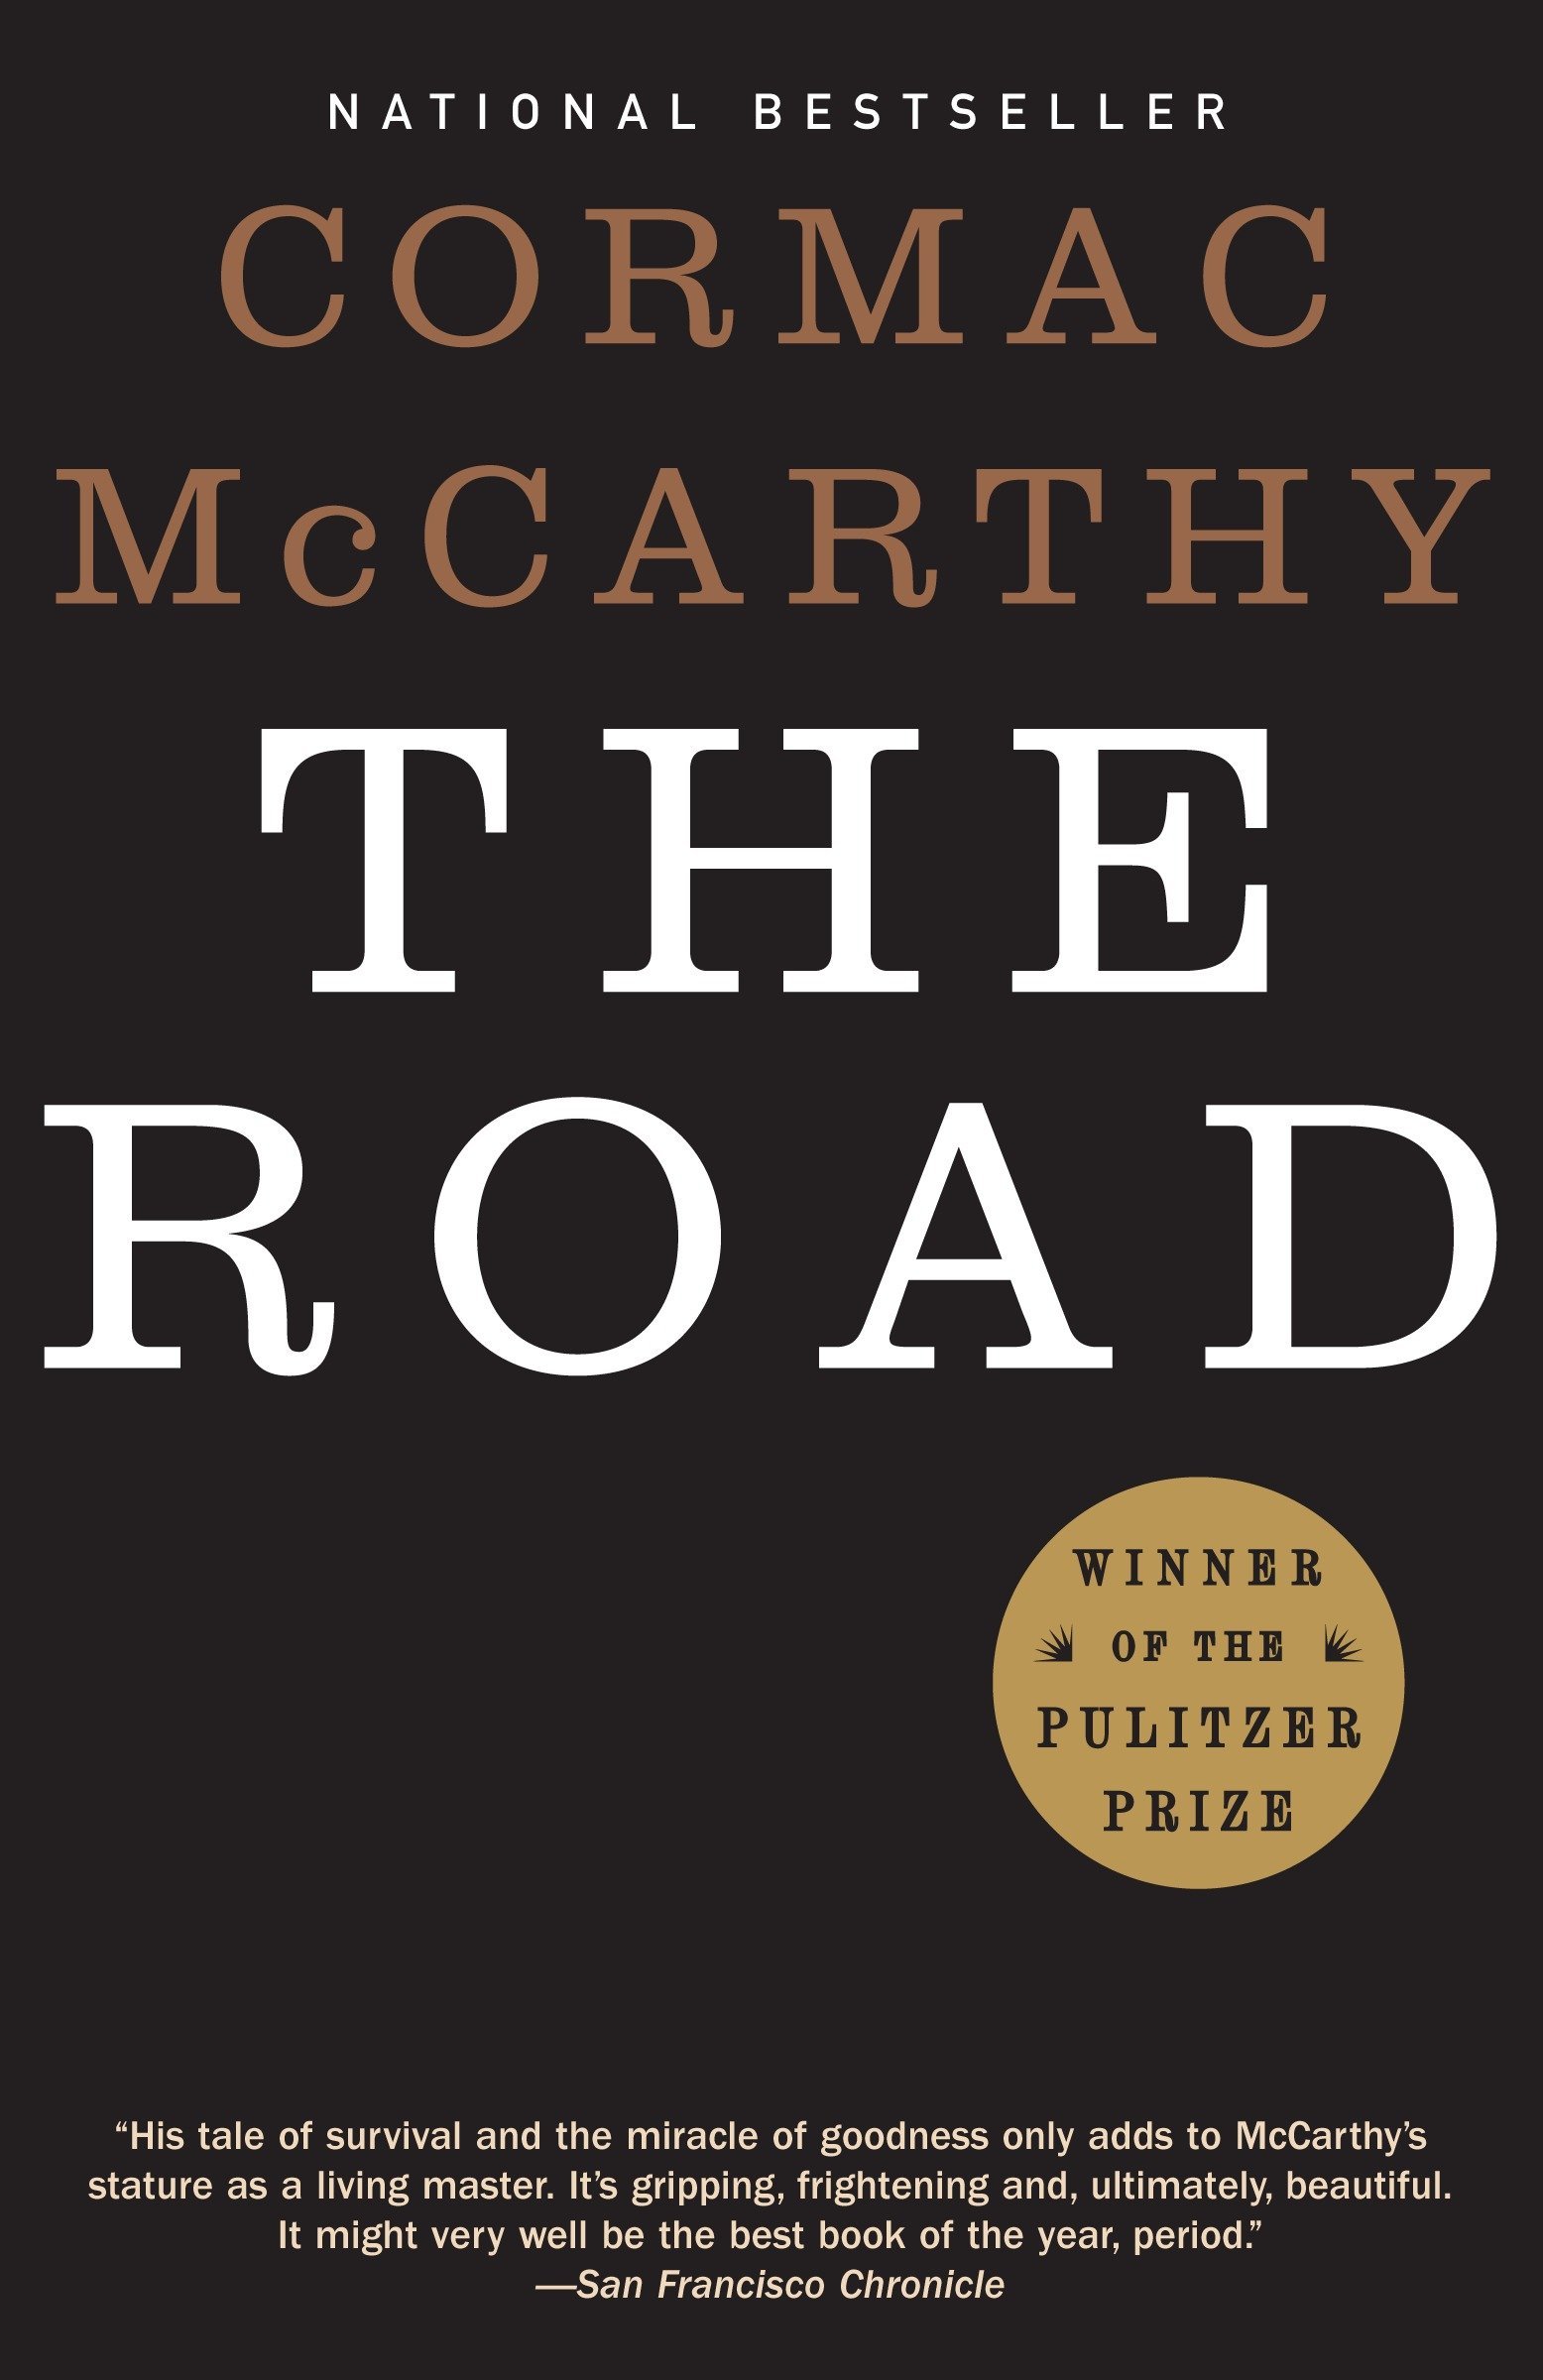 The Road by Cormac McCarthy PDF